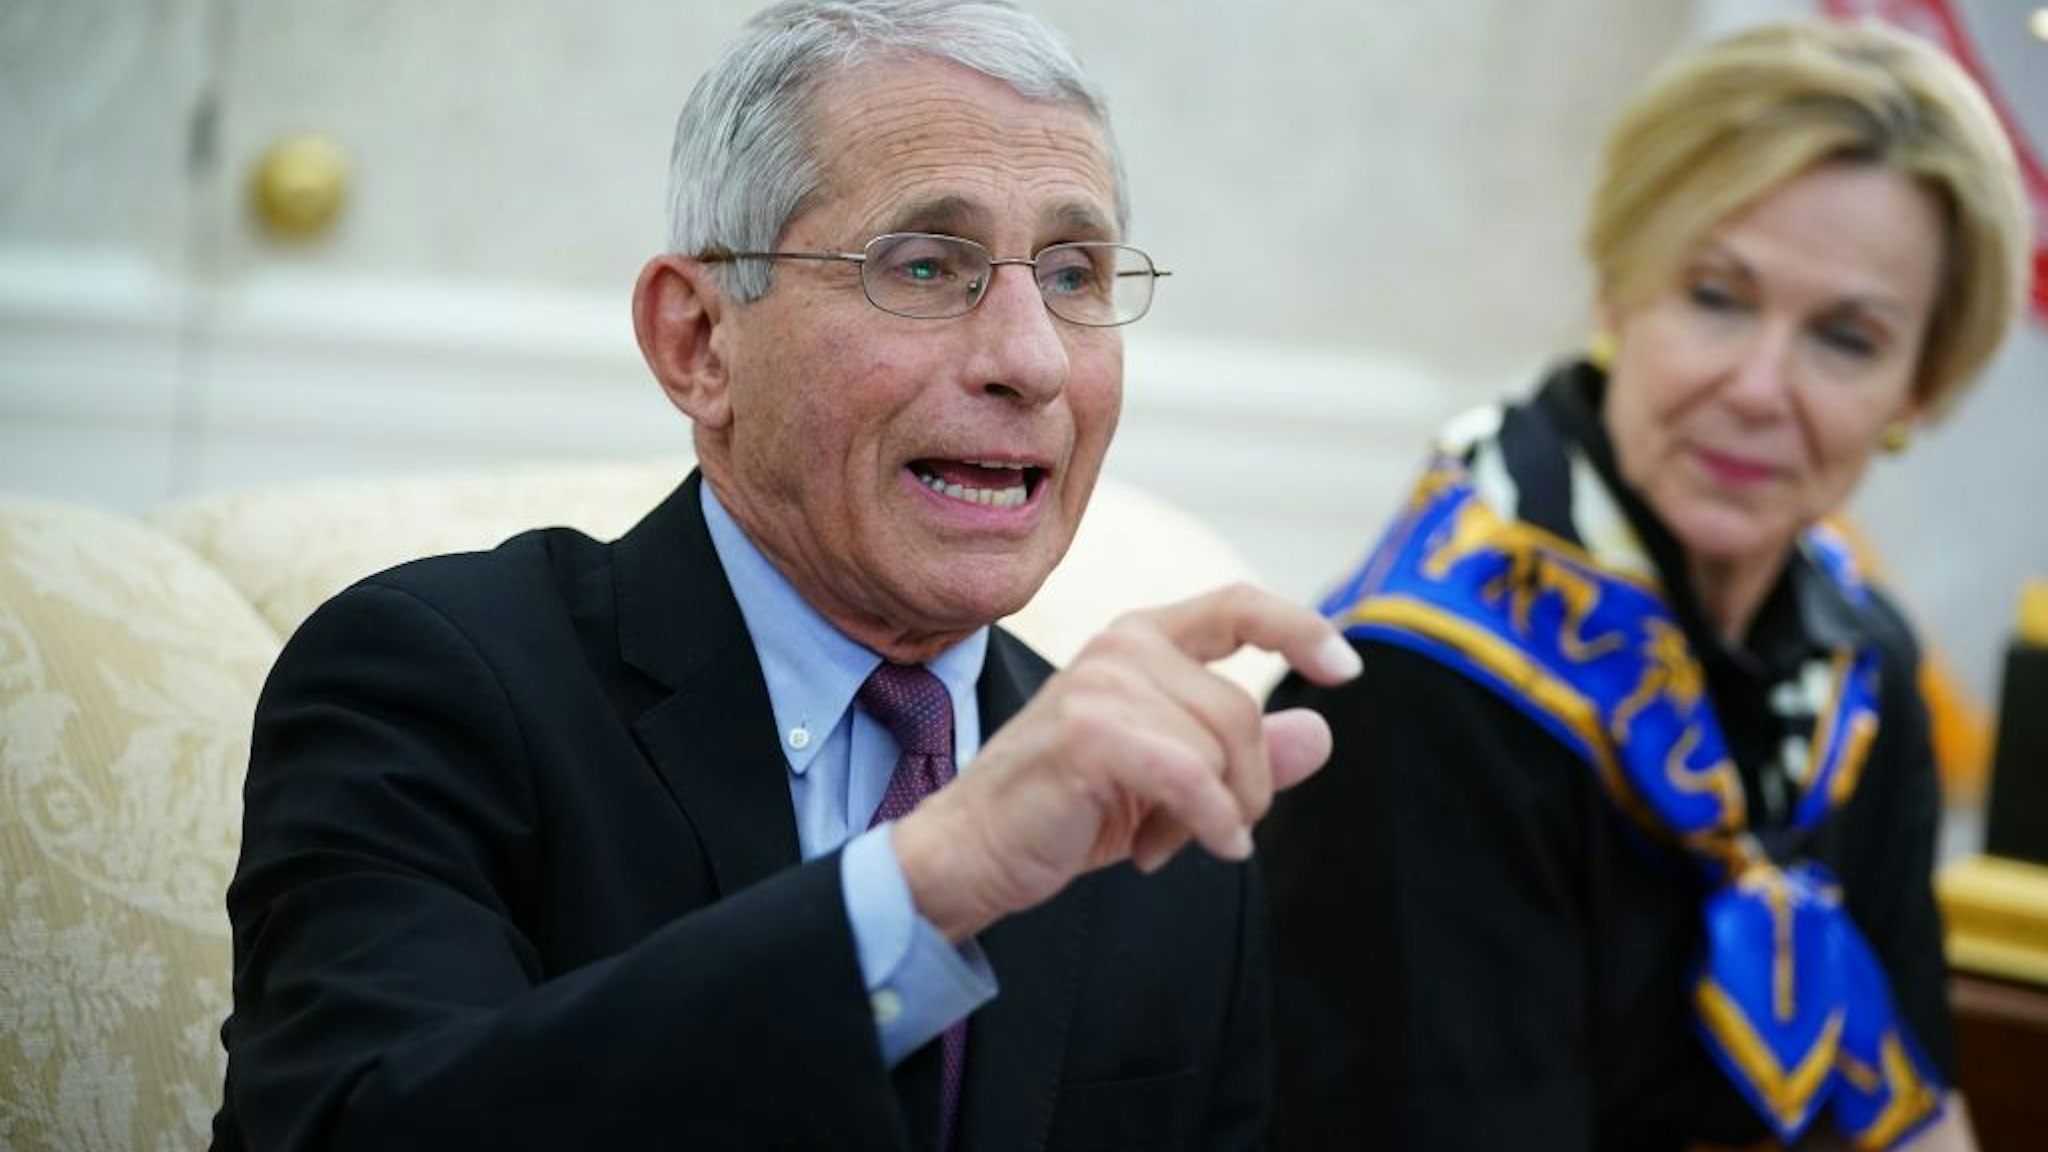 Dr. Anthony Fauci (L), director of the National Institute of Allergy and Infectious Diseases speaks next to Response coordinator for White House Coronavirus Task Force Deborah Birx, during a meeting with US President Donald Trump and Louisiana Governor John Bel Edwards D-LA in the Oval Office of the White House in Washington, DC on April 29, 2020. (Photo by MANDEL NGAN / AFP) (Photo by MANDEL NGAN/AFP via Getty Images)